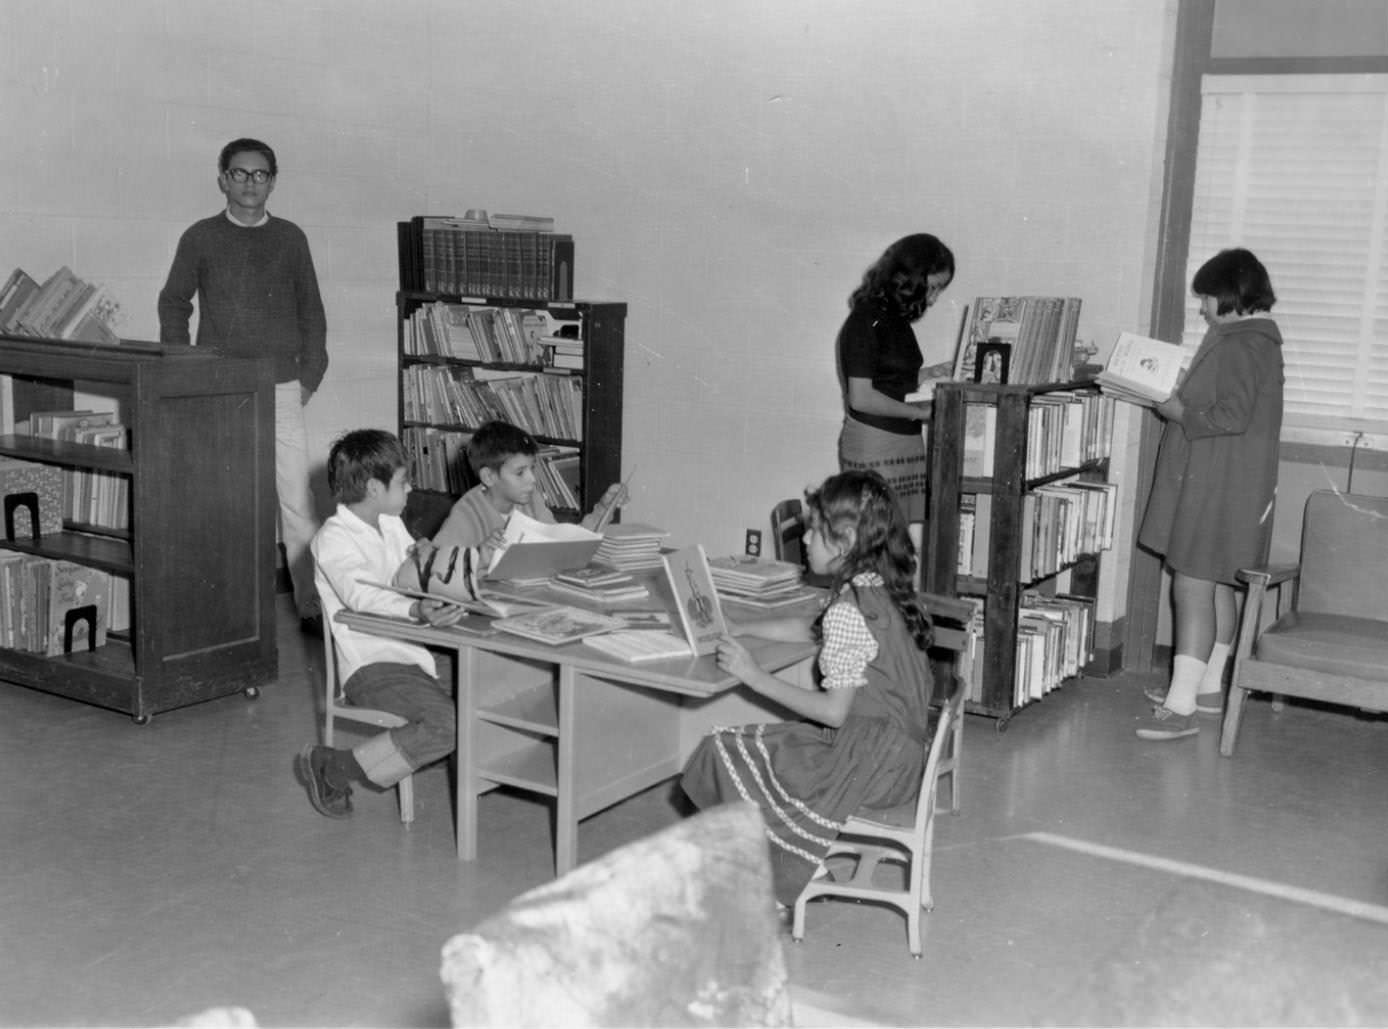 Children reading at the Pan Am Rec Center library, 1966. Three children sit at a child's table with books covering the tabletop in front of them.